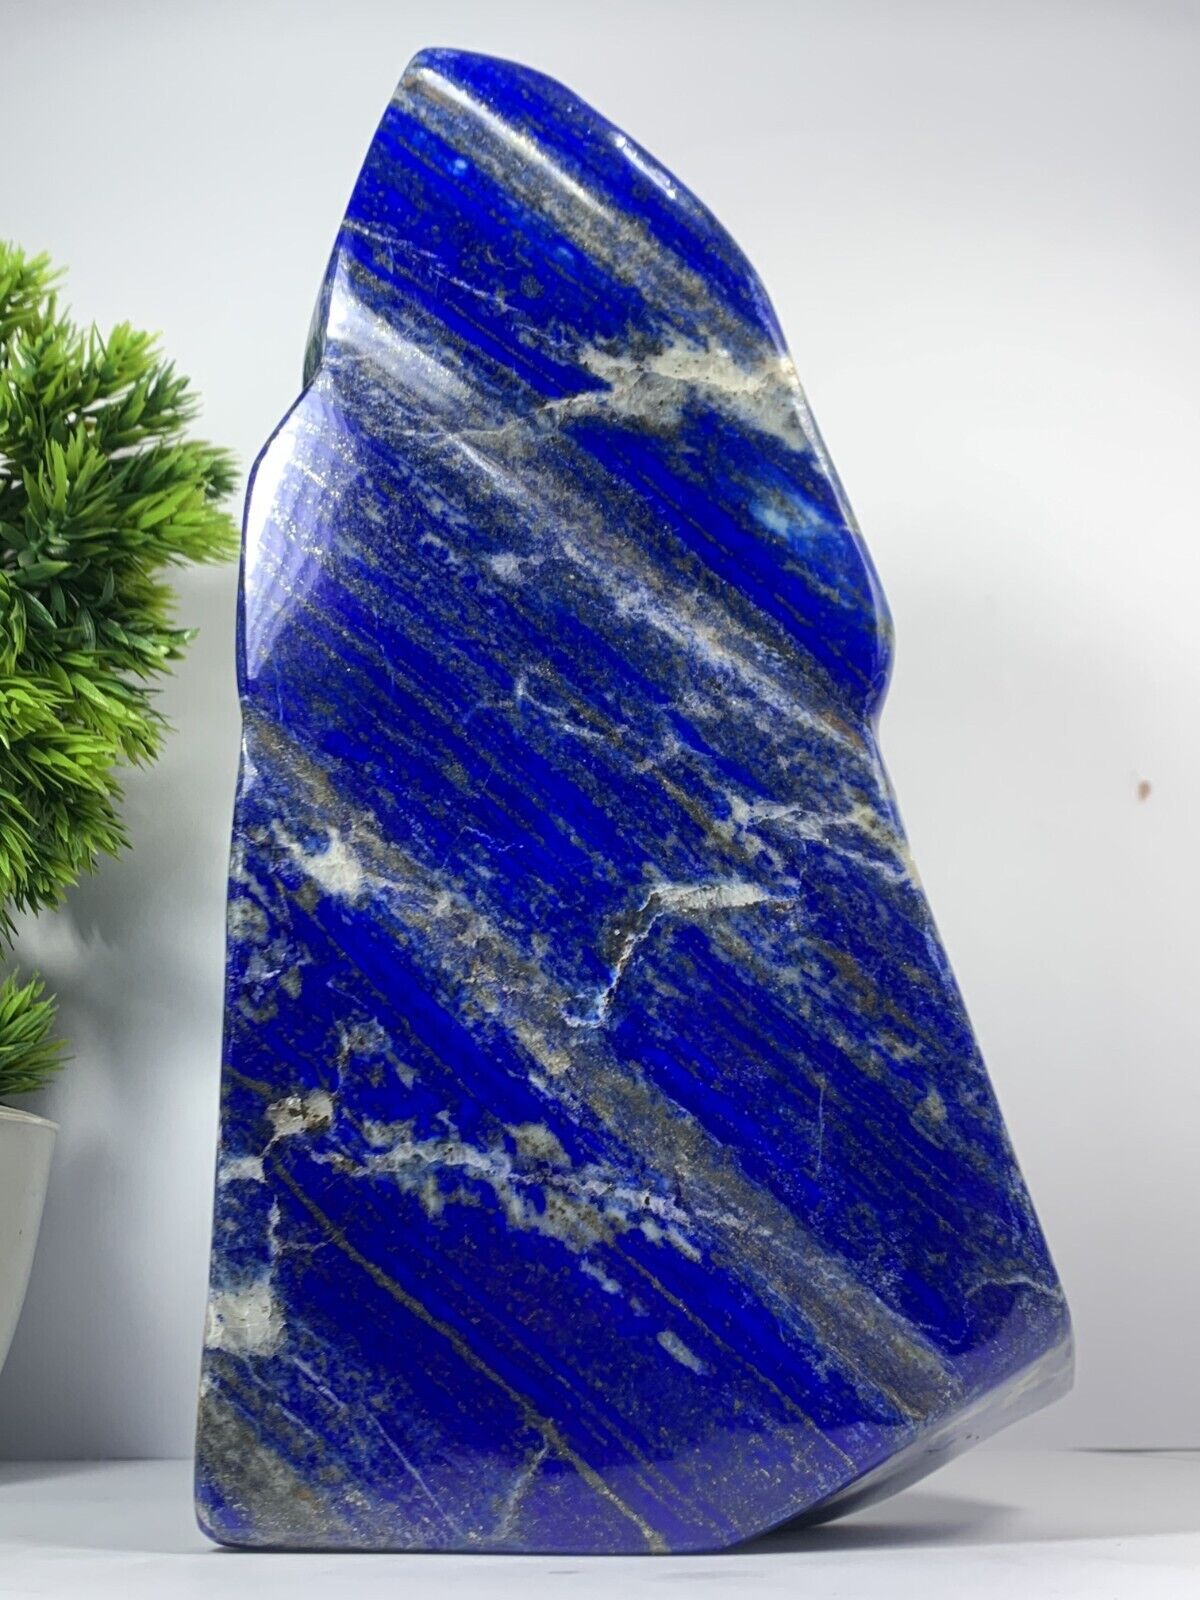 4976 Gram A+++ Natural Beautiful Polished Freeform Lapis Lazuli From Afghanistan